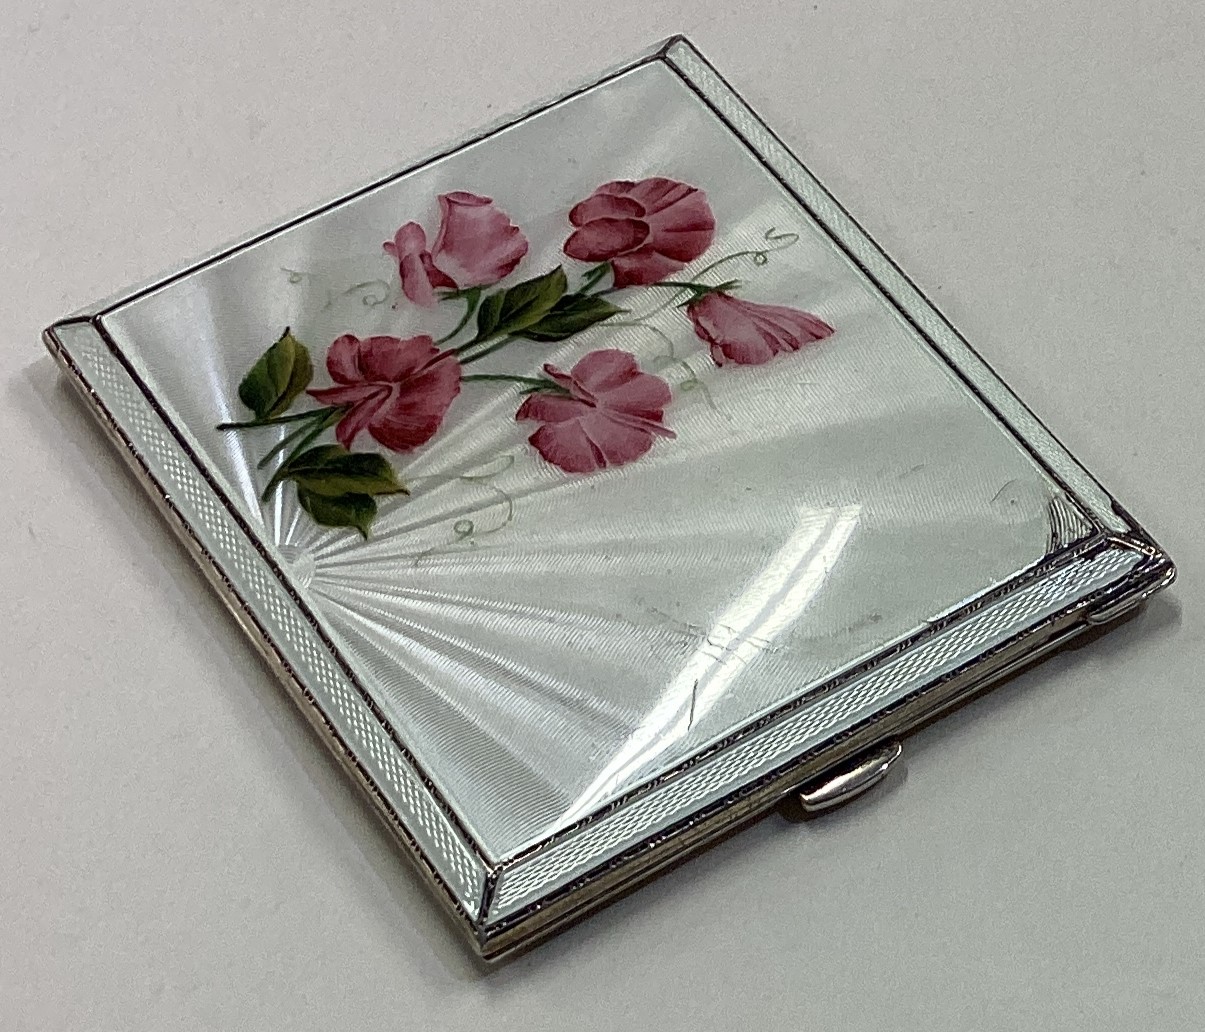 A silver and enamelled cigarette case decorated with flowers.